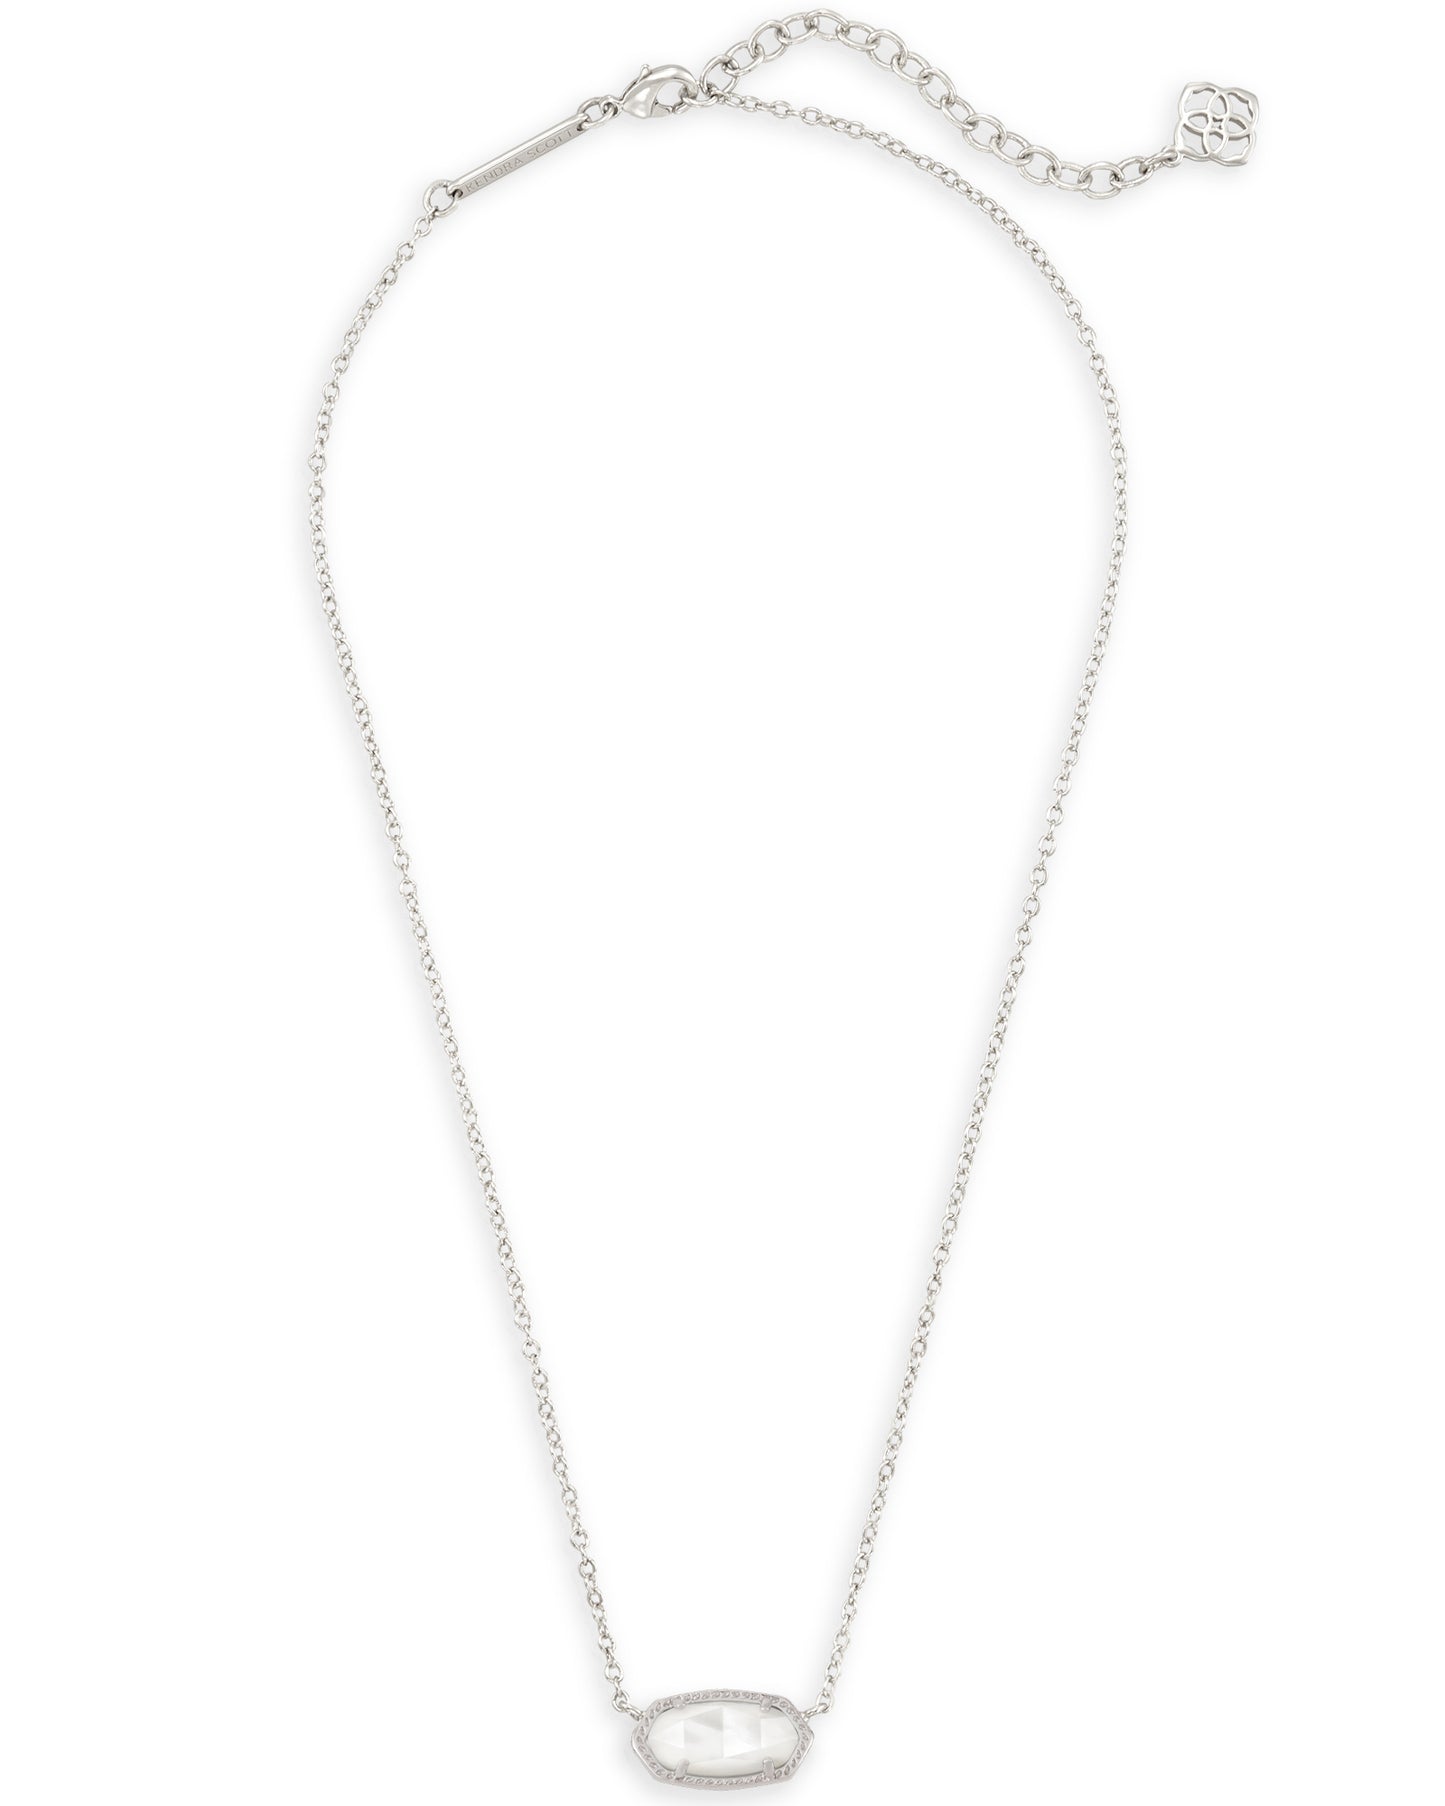 Kendra Scott Elisa Silver Short Pendant Necklace - Ivory Mother of Pearl-Necklaces-Kendra Scott-N5067RHD-The Twisted Chandelier